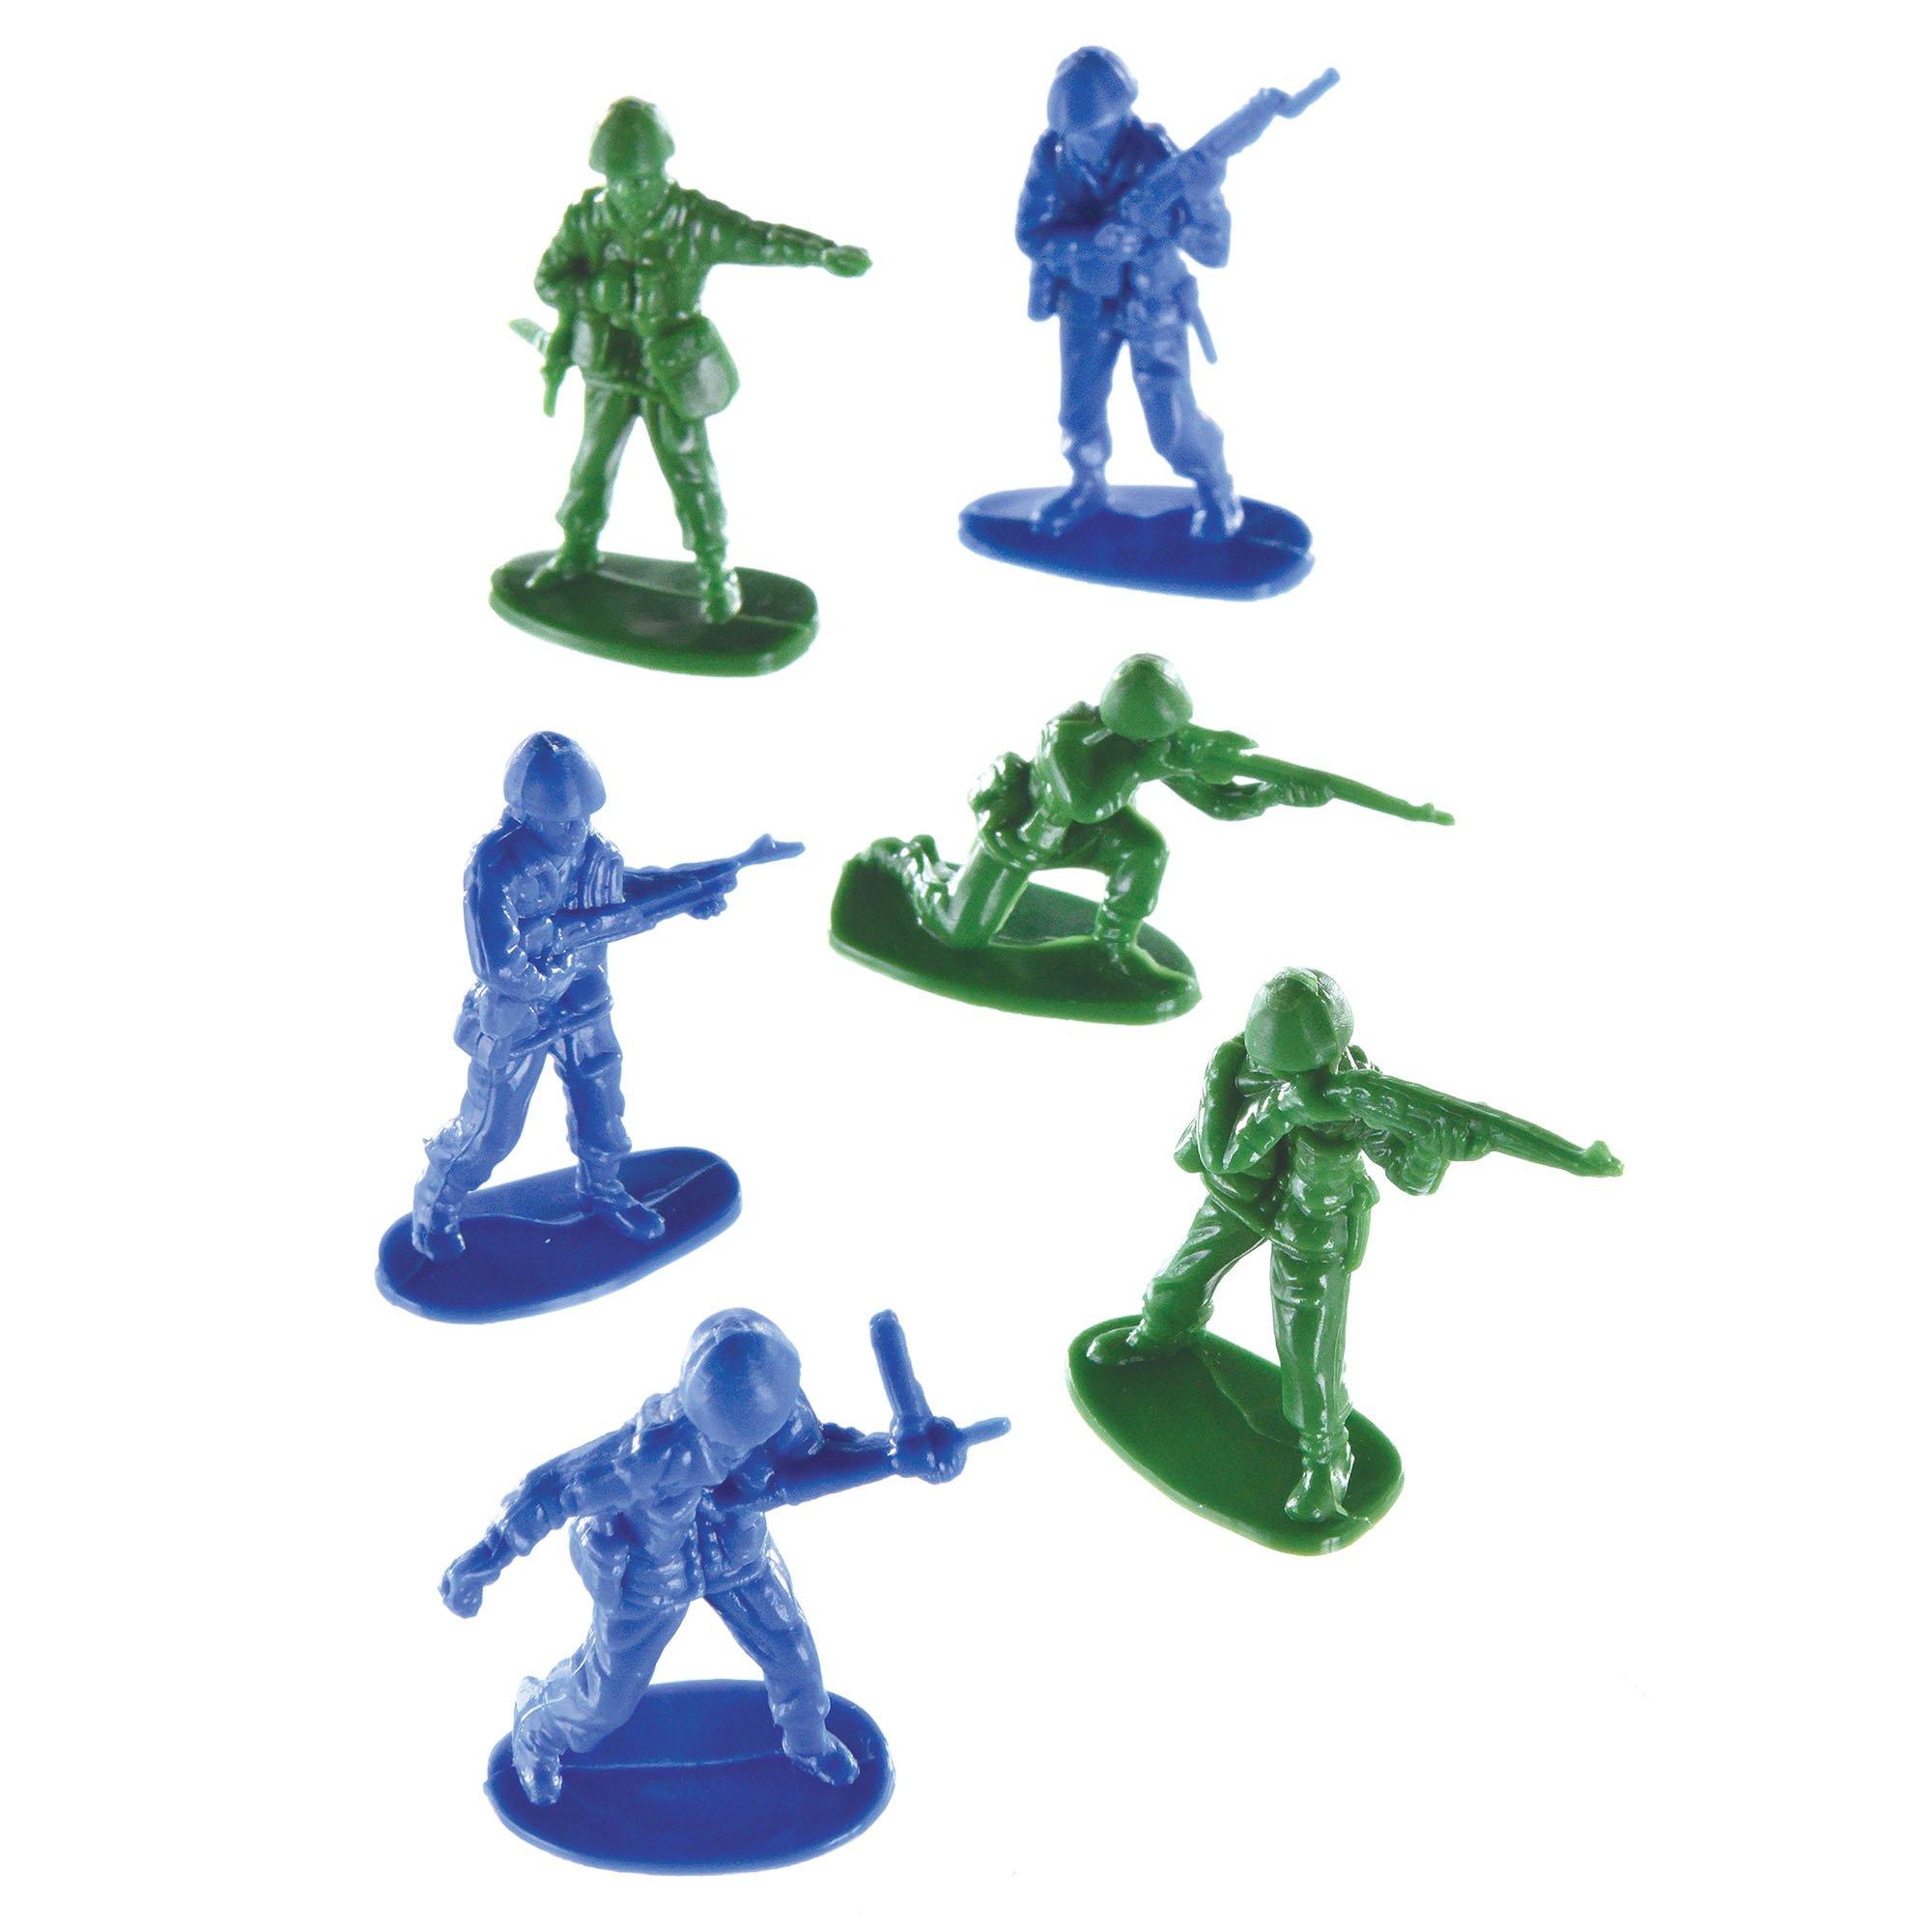 toy army men sets